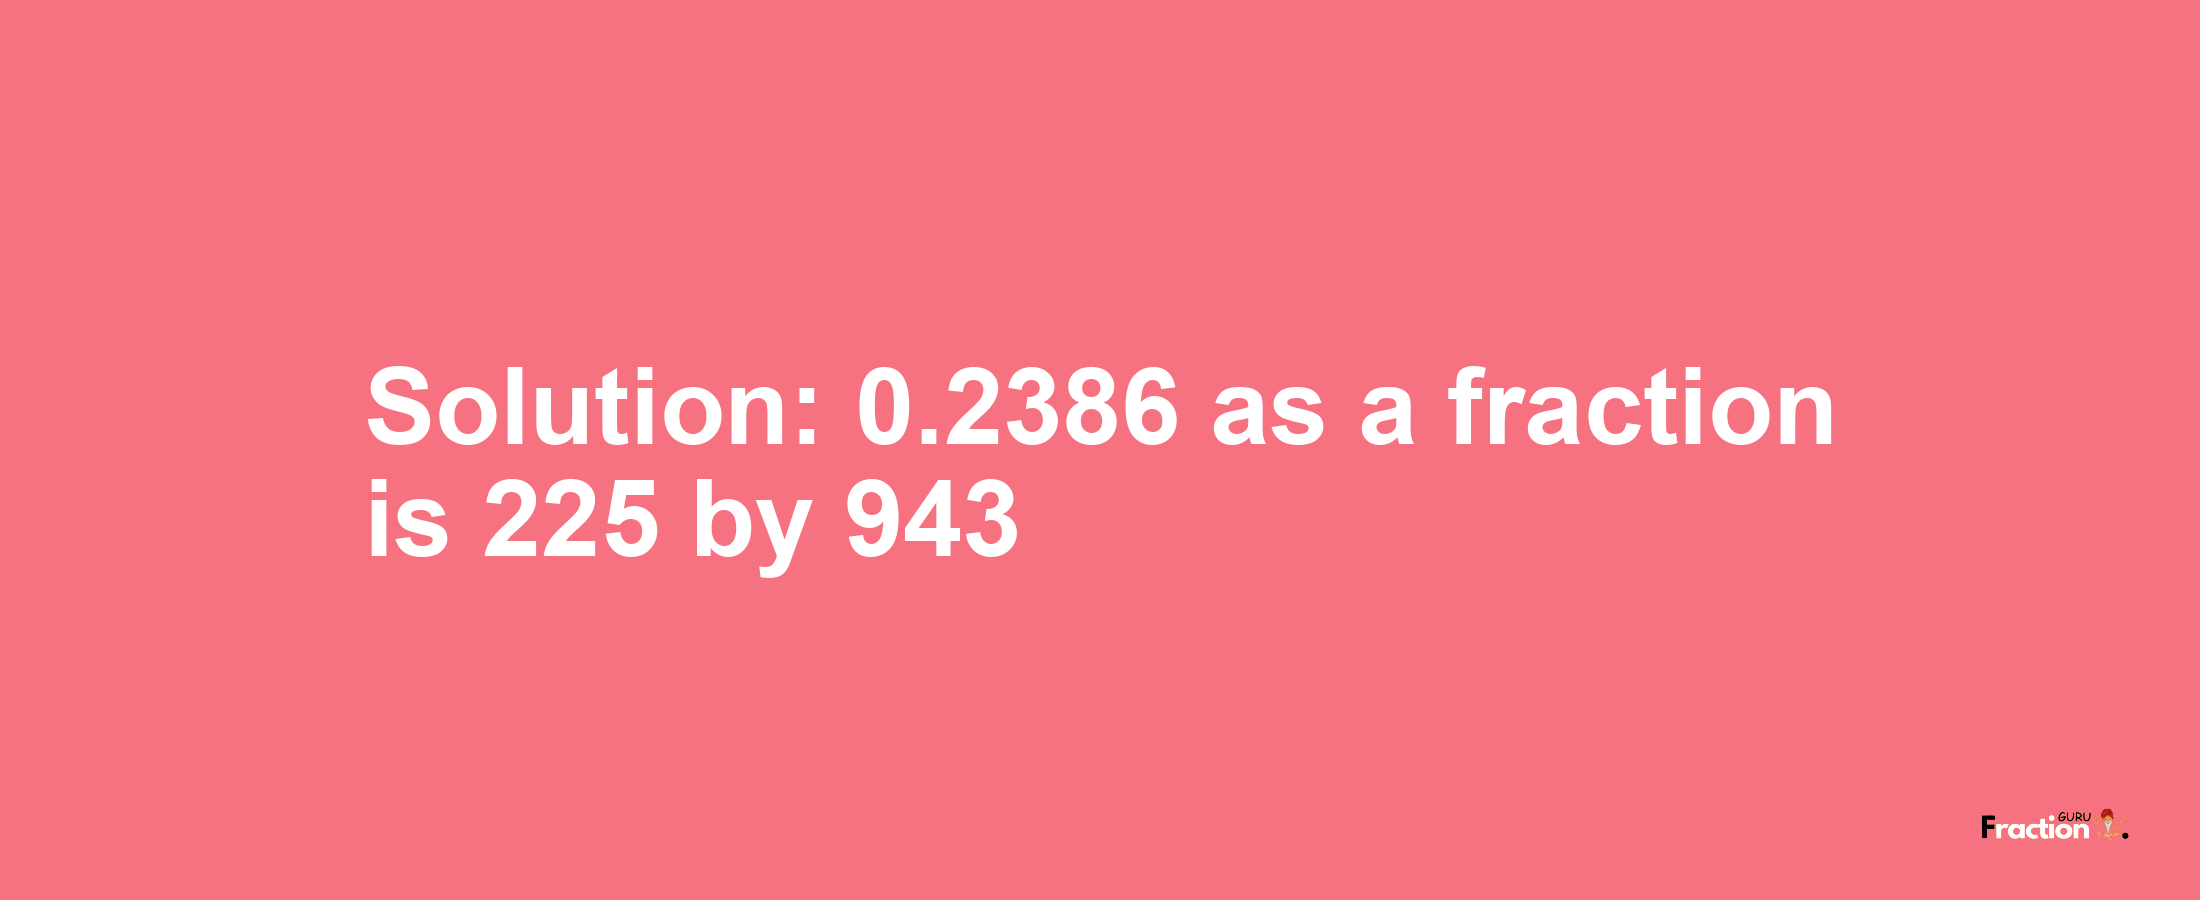 Solution:0.2386 as a fraction is 225/943